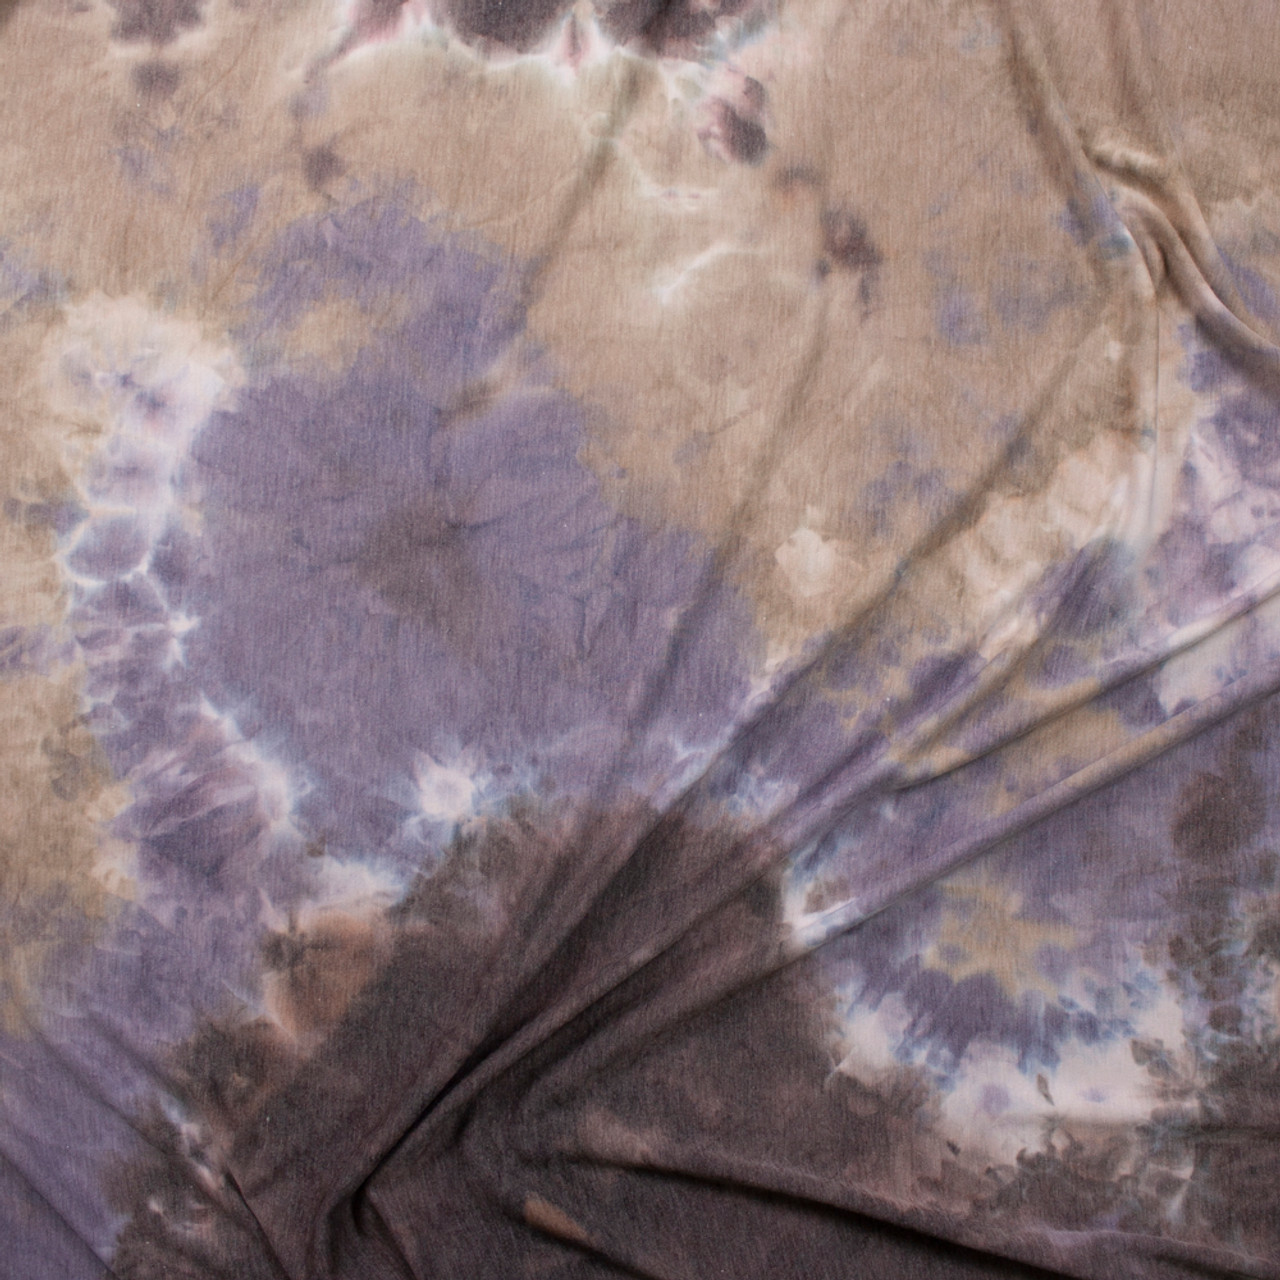 Terry Chenille Fabric by the Yard - Lilac (Lavender Purple) (TC-0525-596)